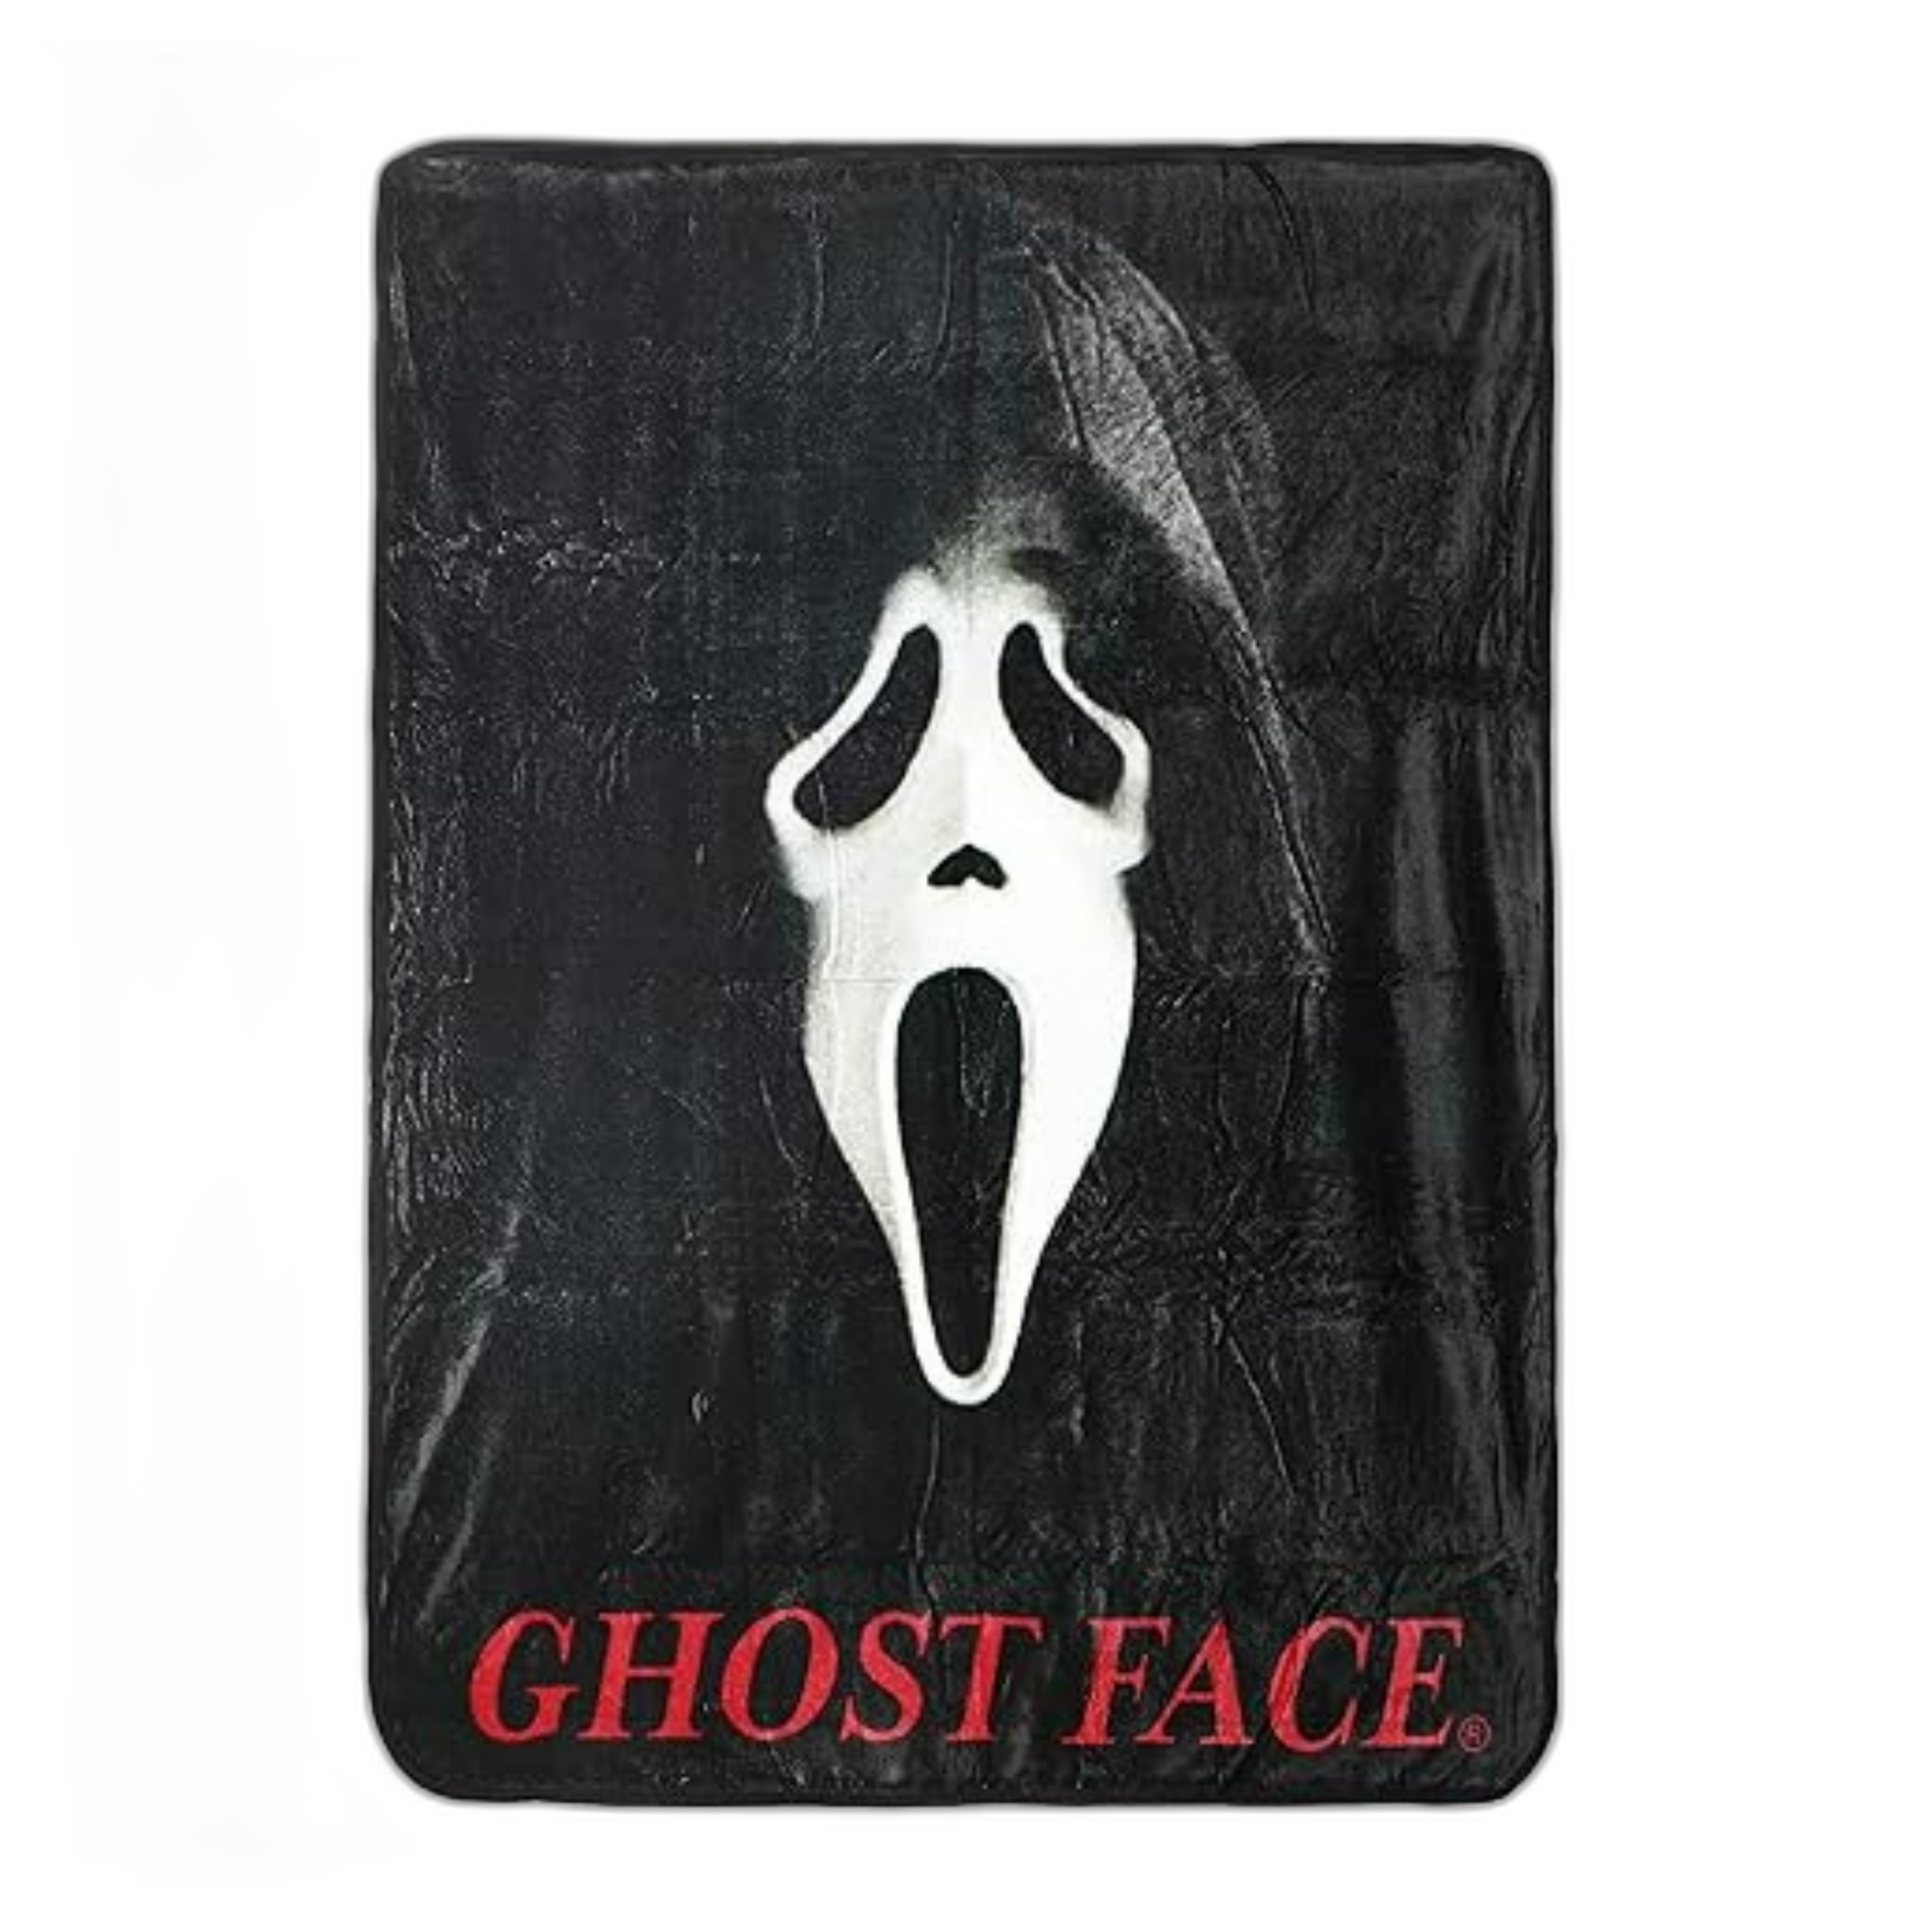 Ghostface throw blanket with the mask of ghostface, and the words 